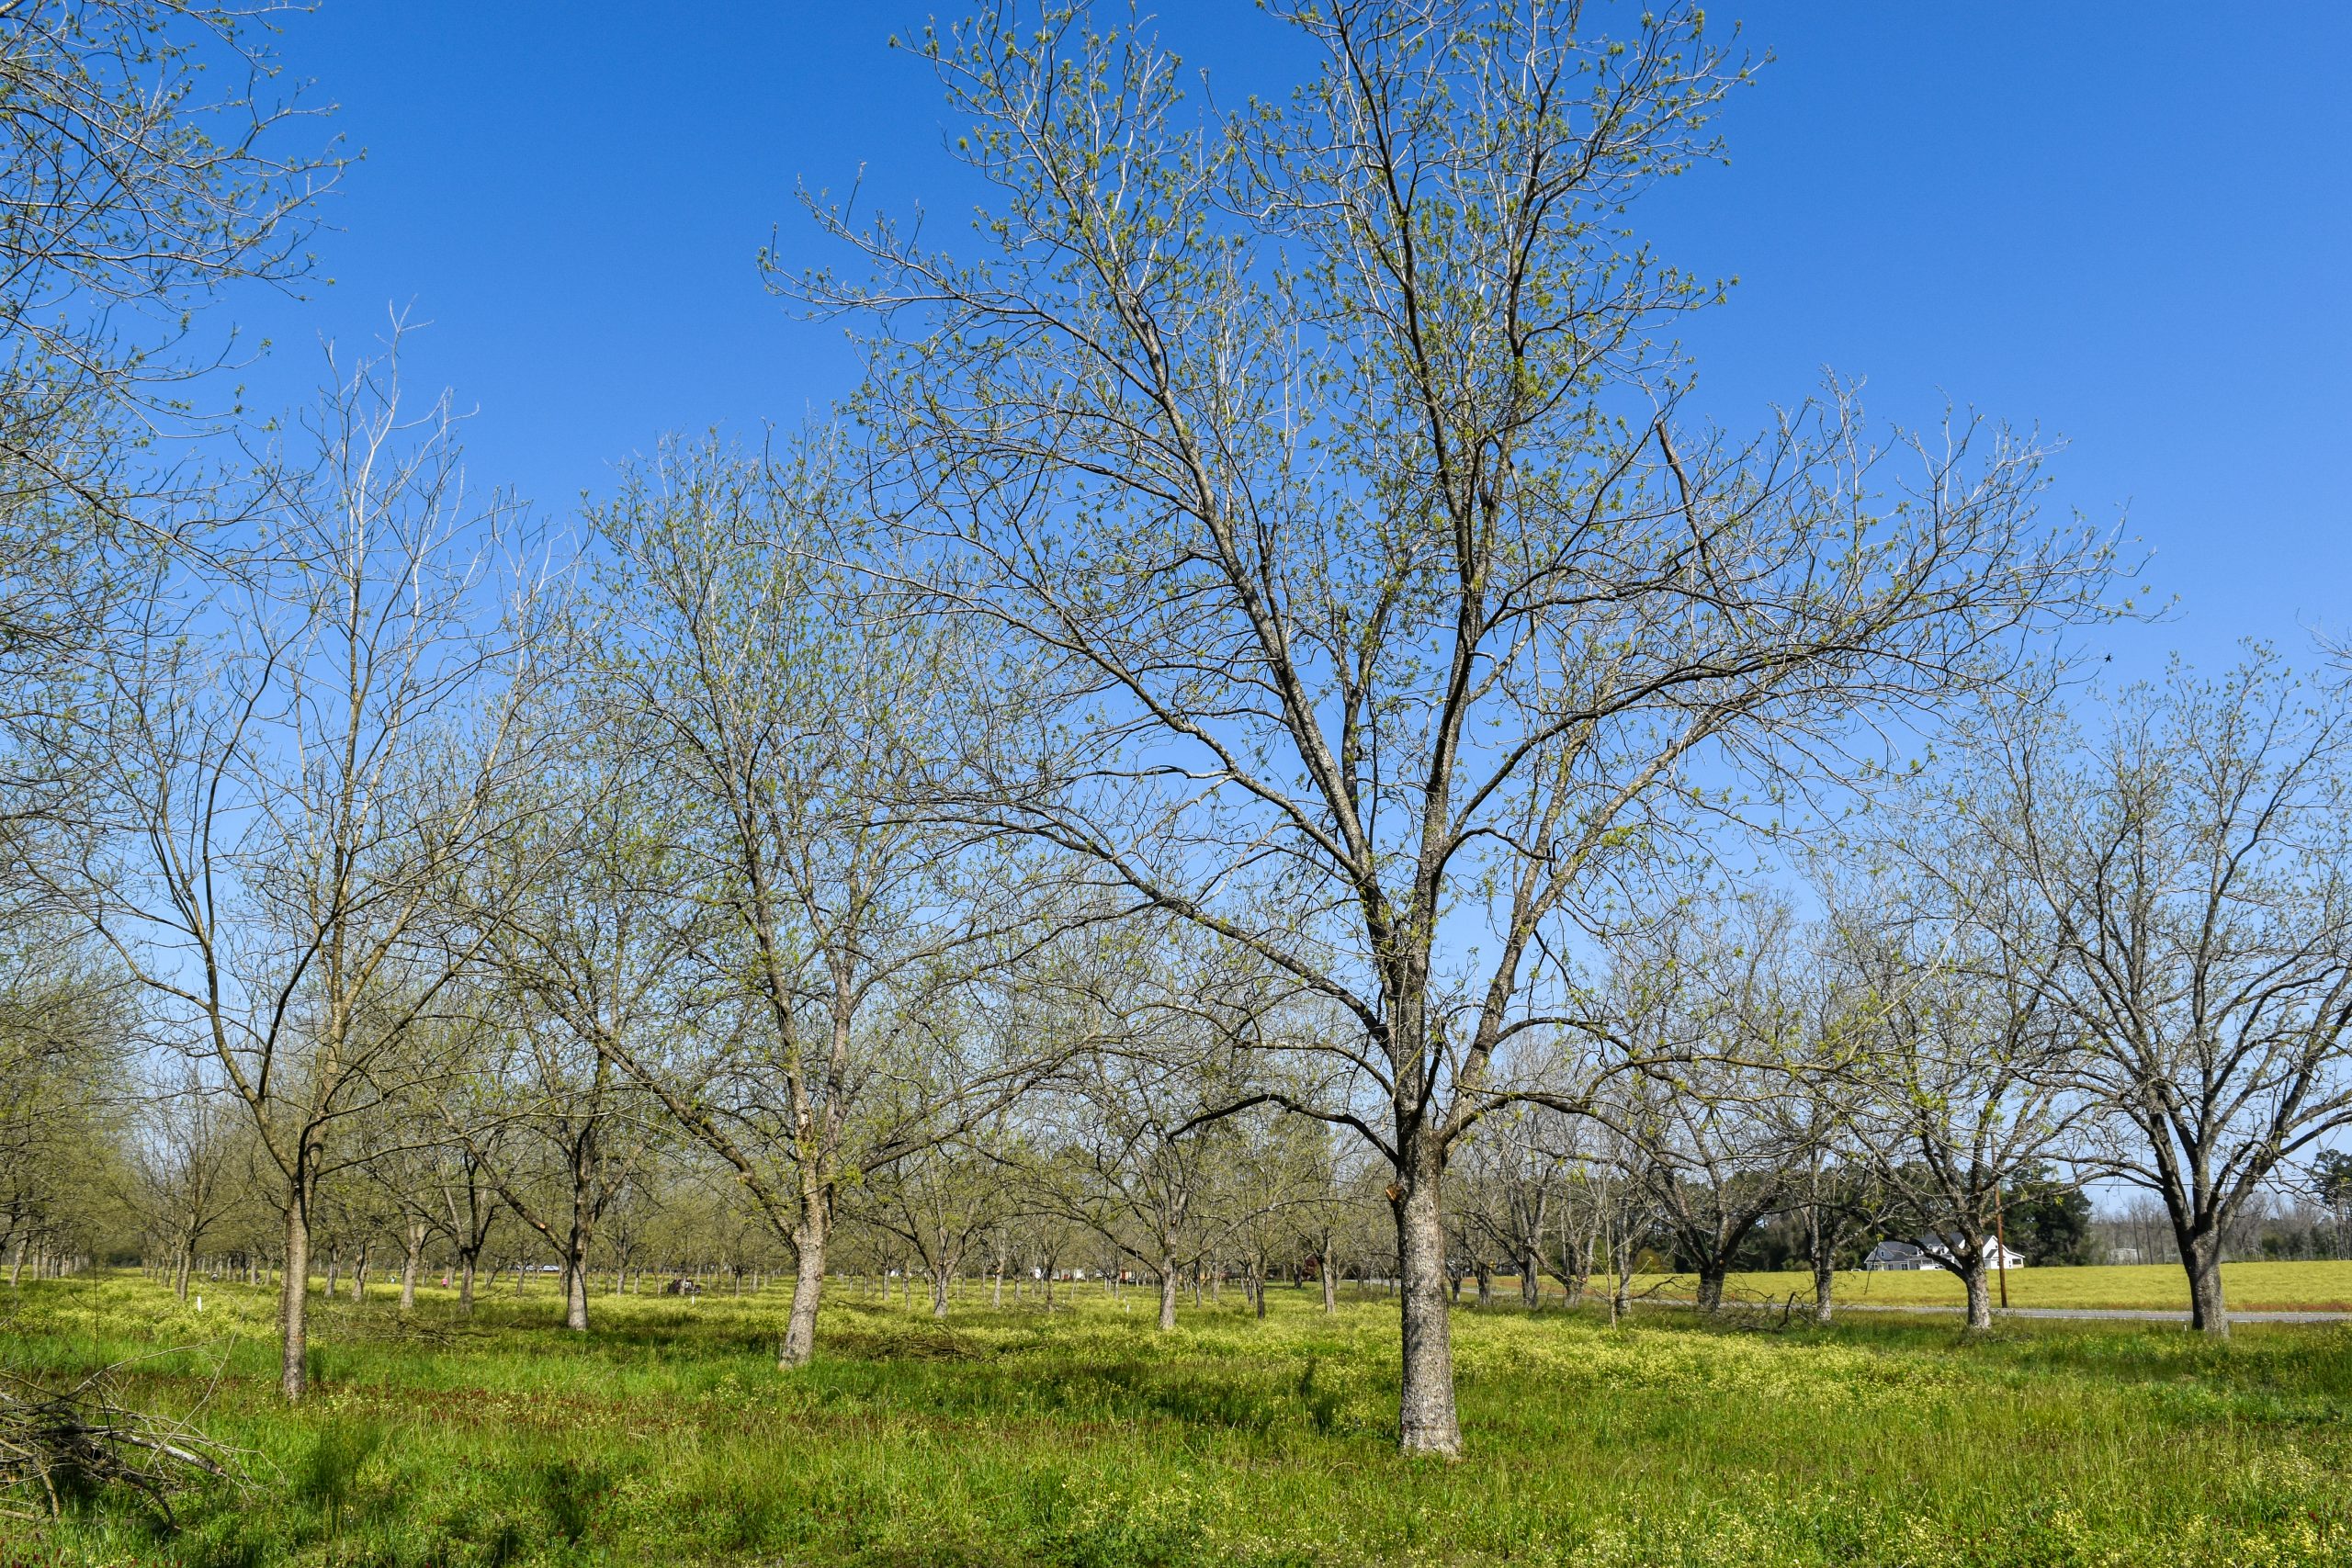 A photo of an orchard in early spring in Georgia. Mature pecan trees have bright, green buds on their branches and show signs of leaving dormancy.